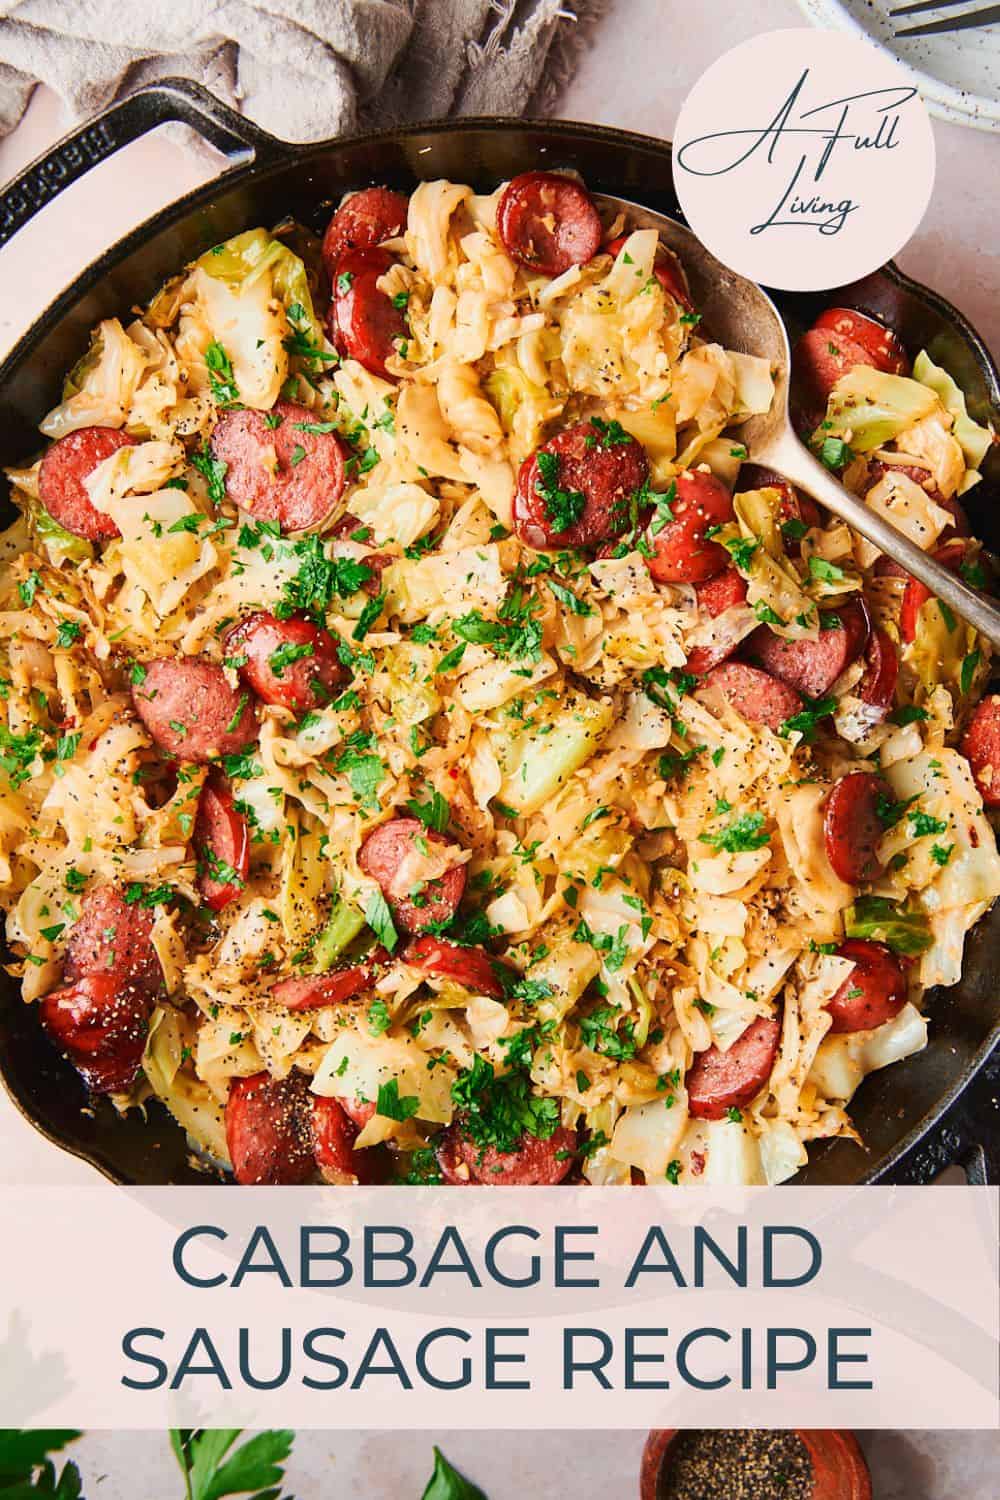 Cabbage and Sausage Recipe.